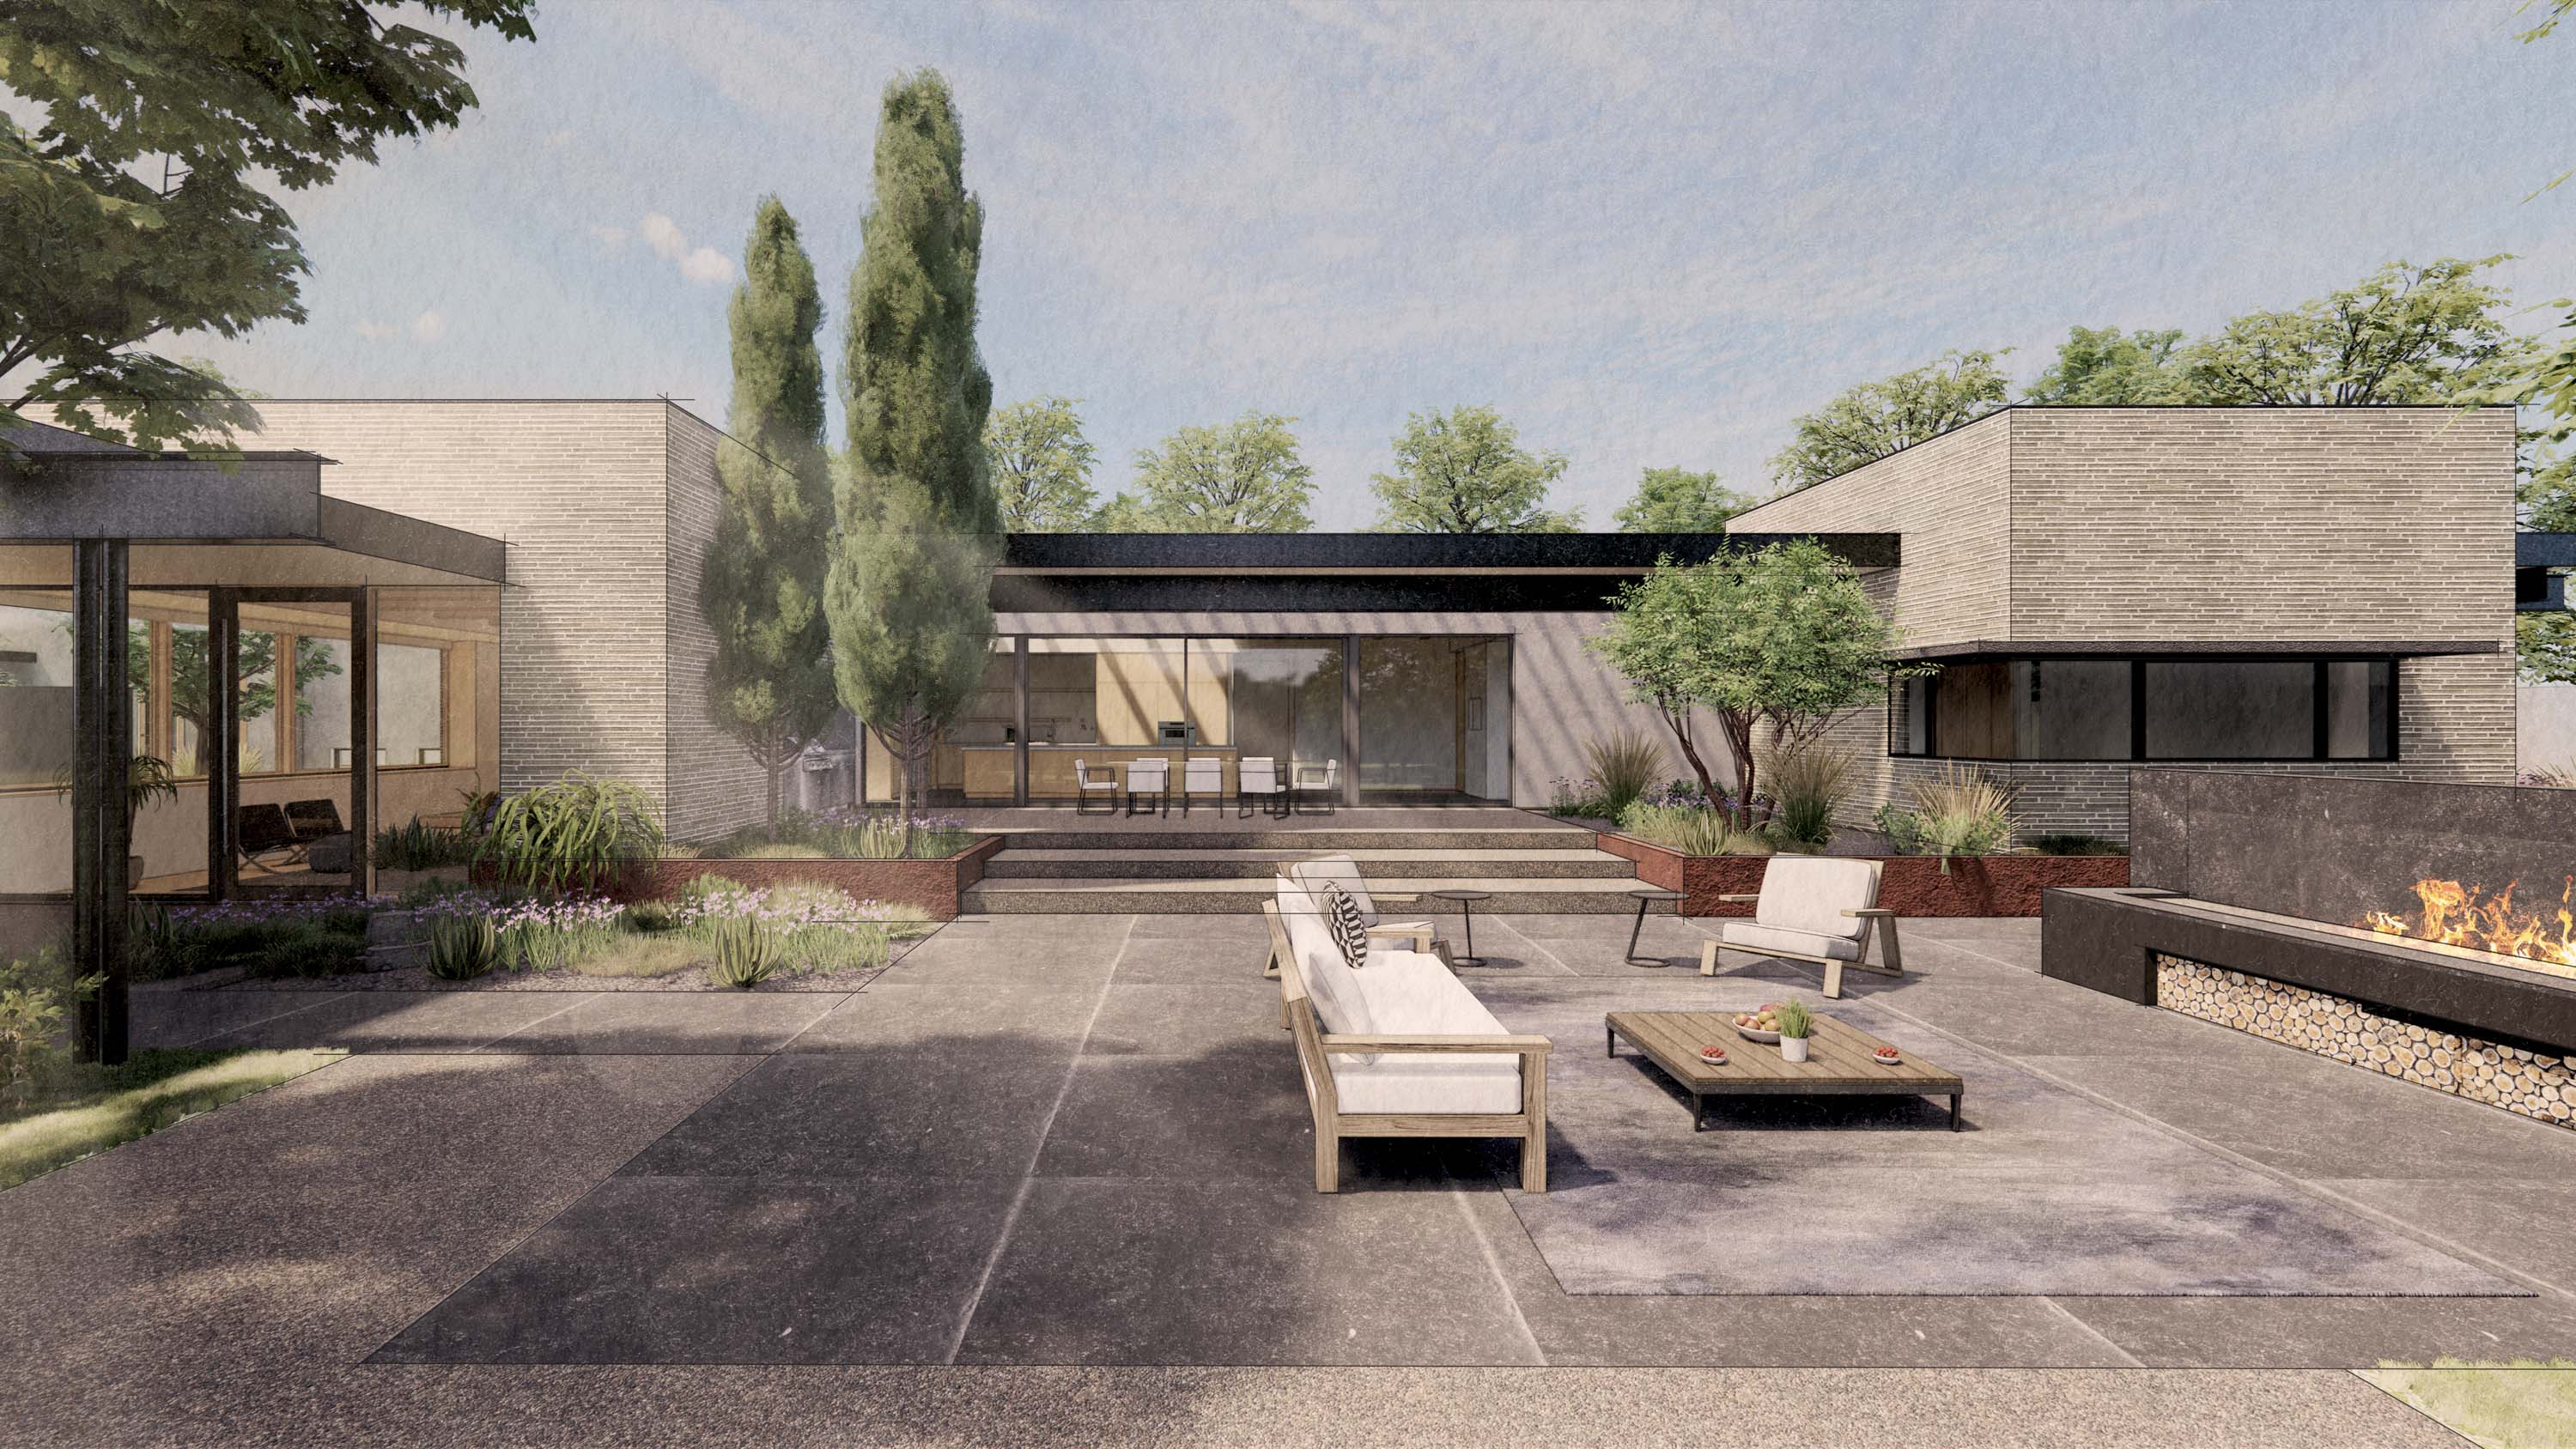 Exterior rendering of Tesuque House by Specht Novak Architects, showcasing the serene retreat of the central courtyard.